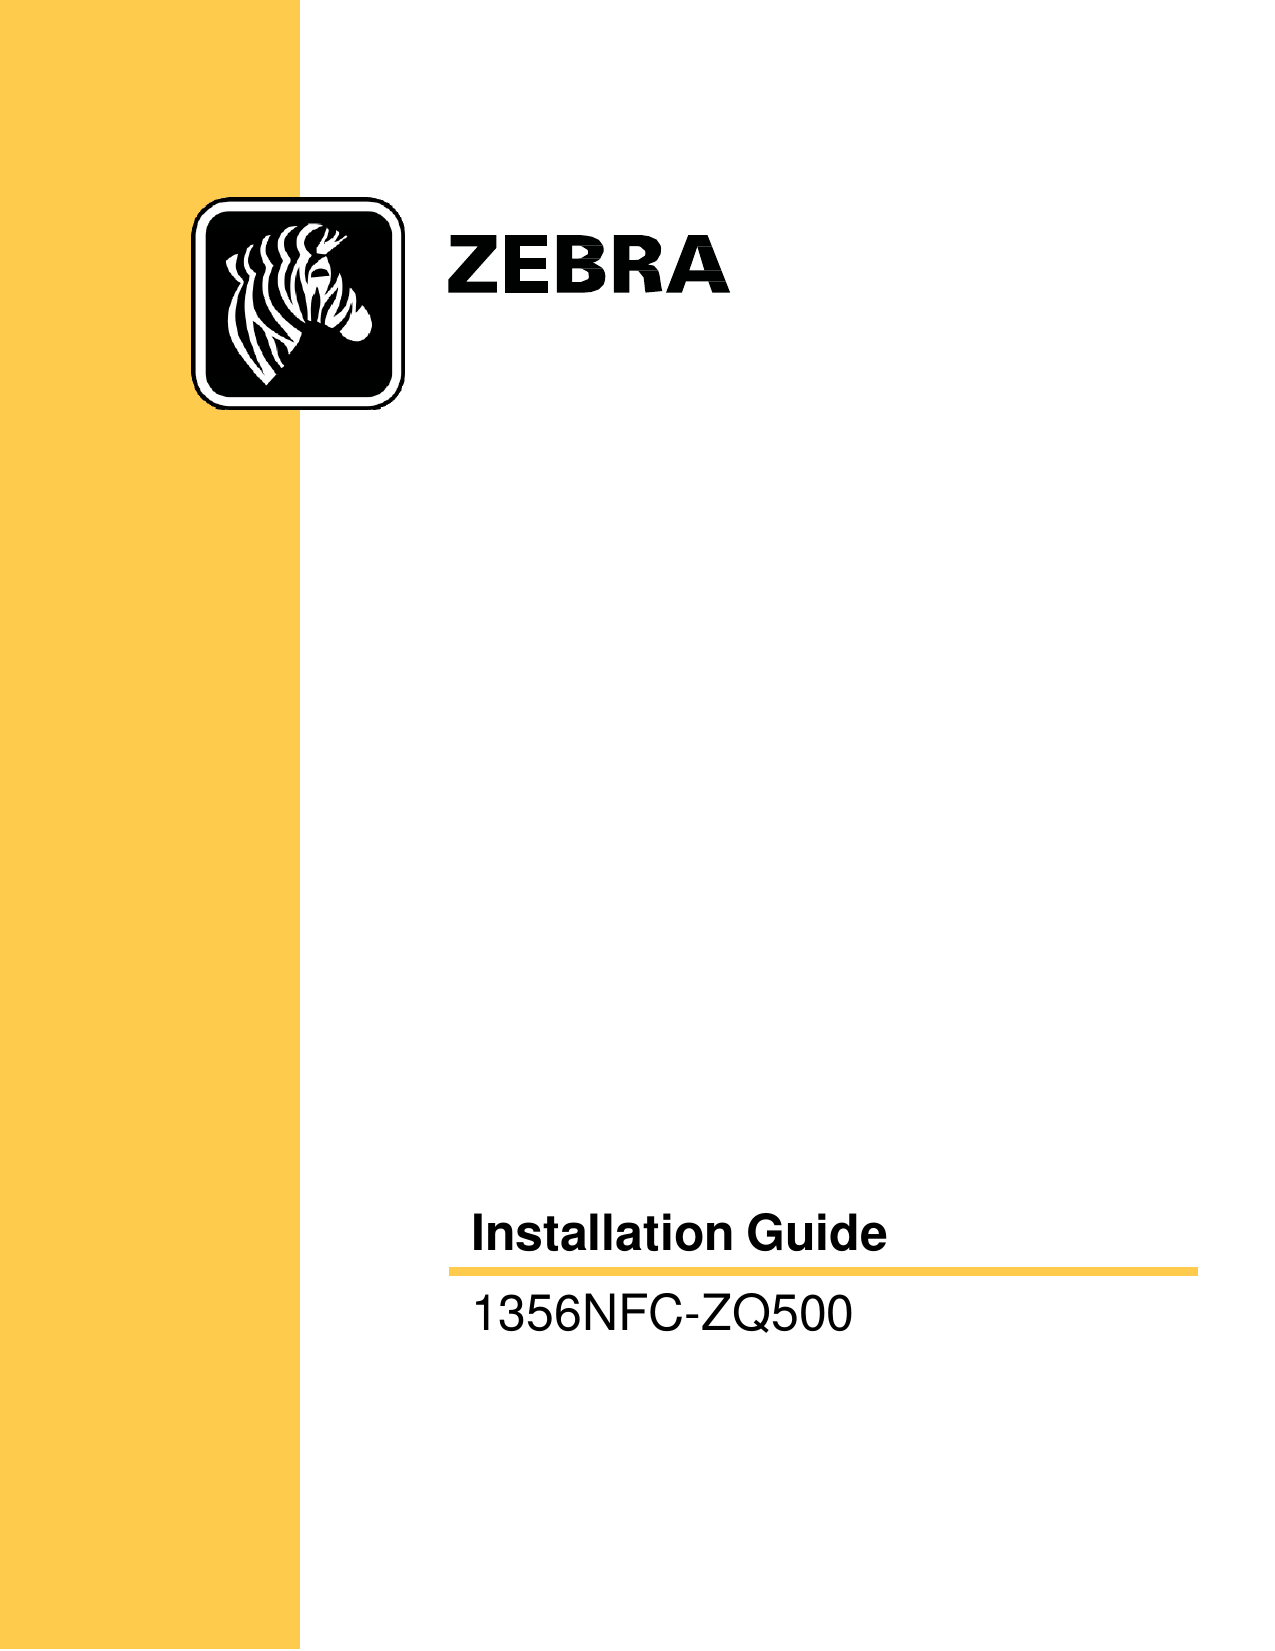 Installation Guide 1356NFC-ZQ500         